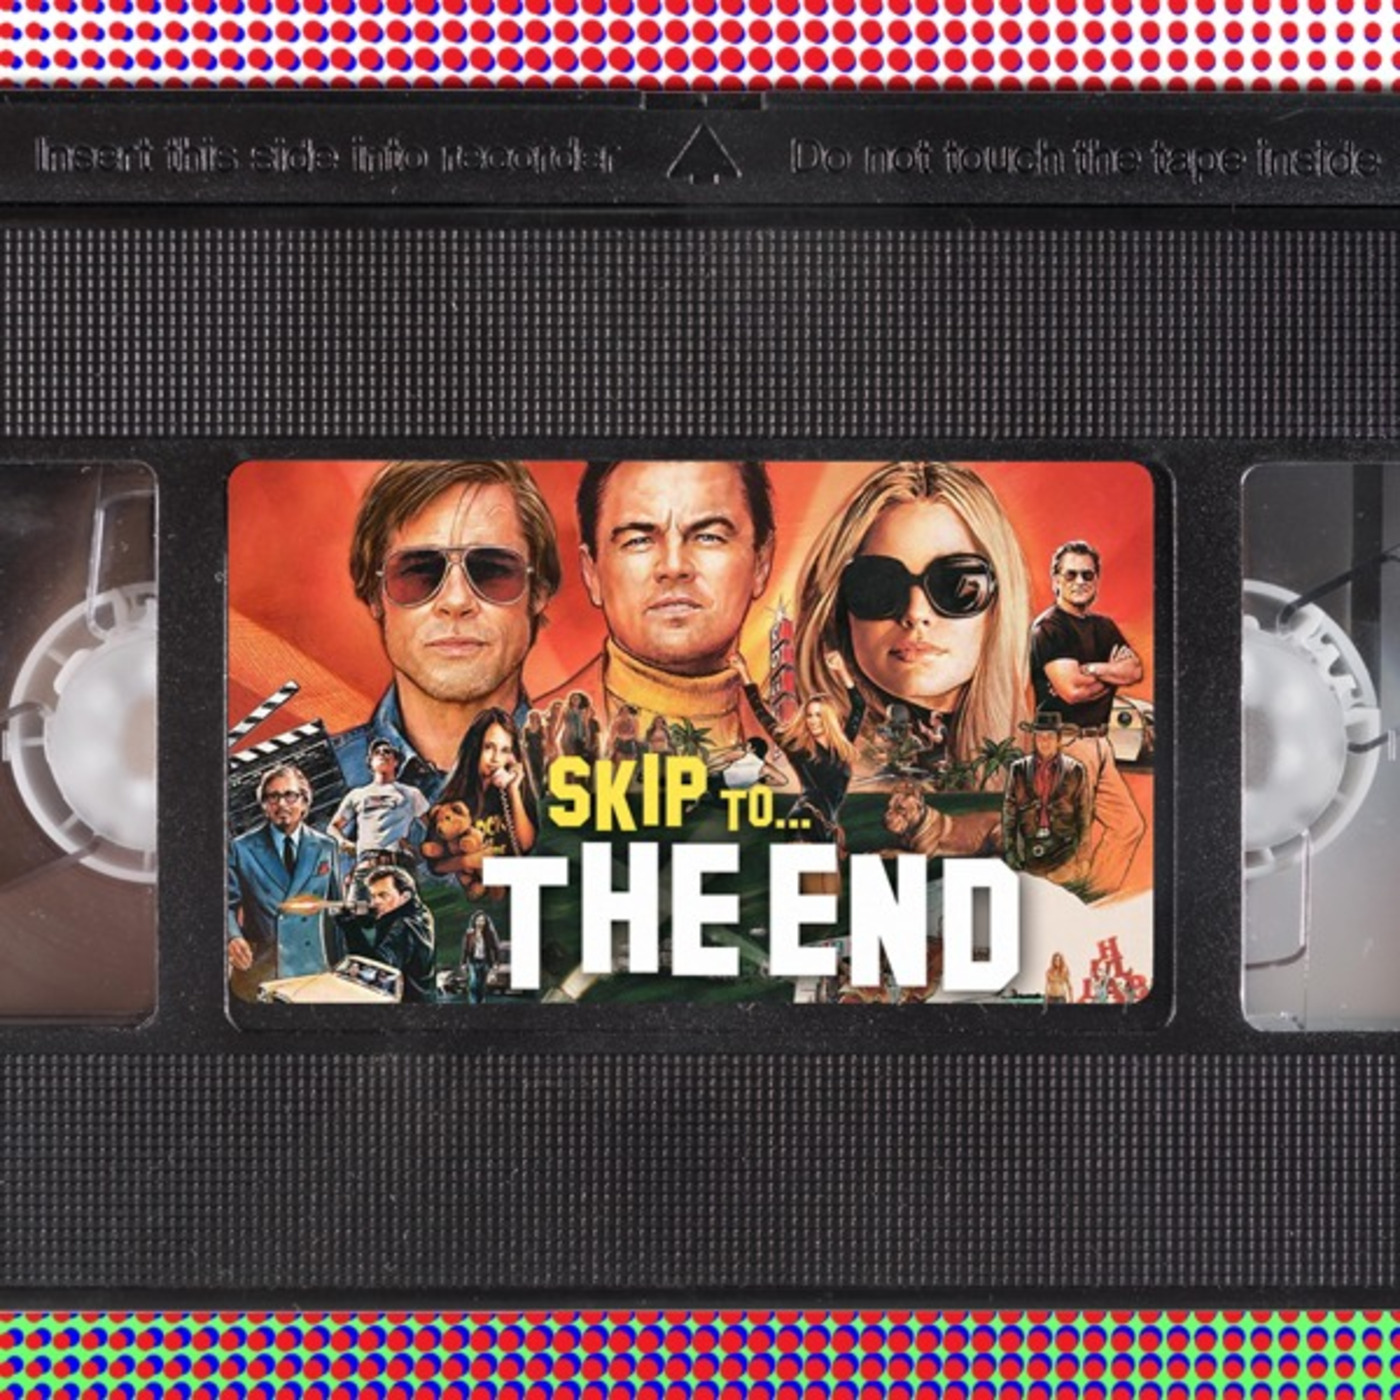 Episode 126 - Once Upon A Time In Hollywood